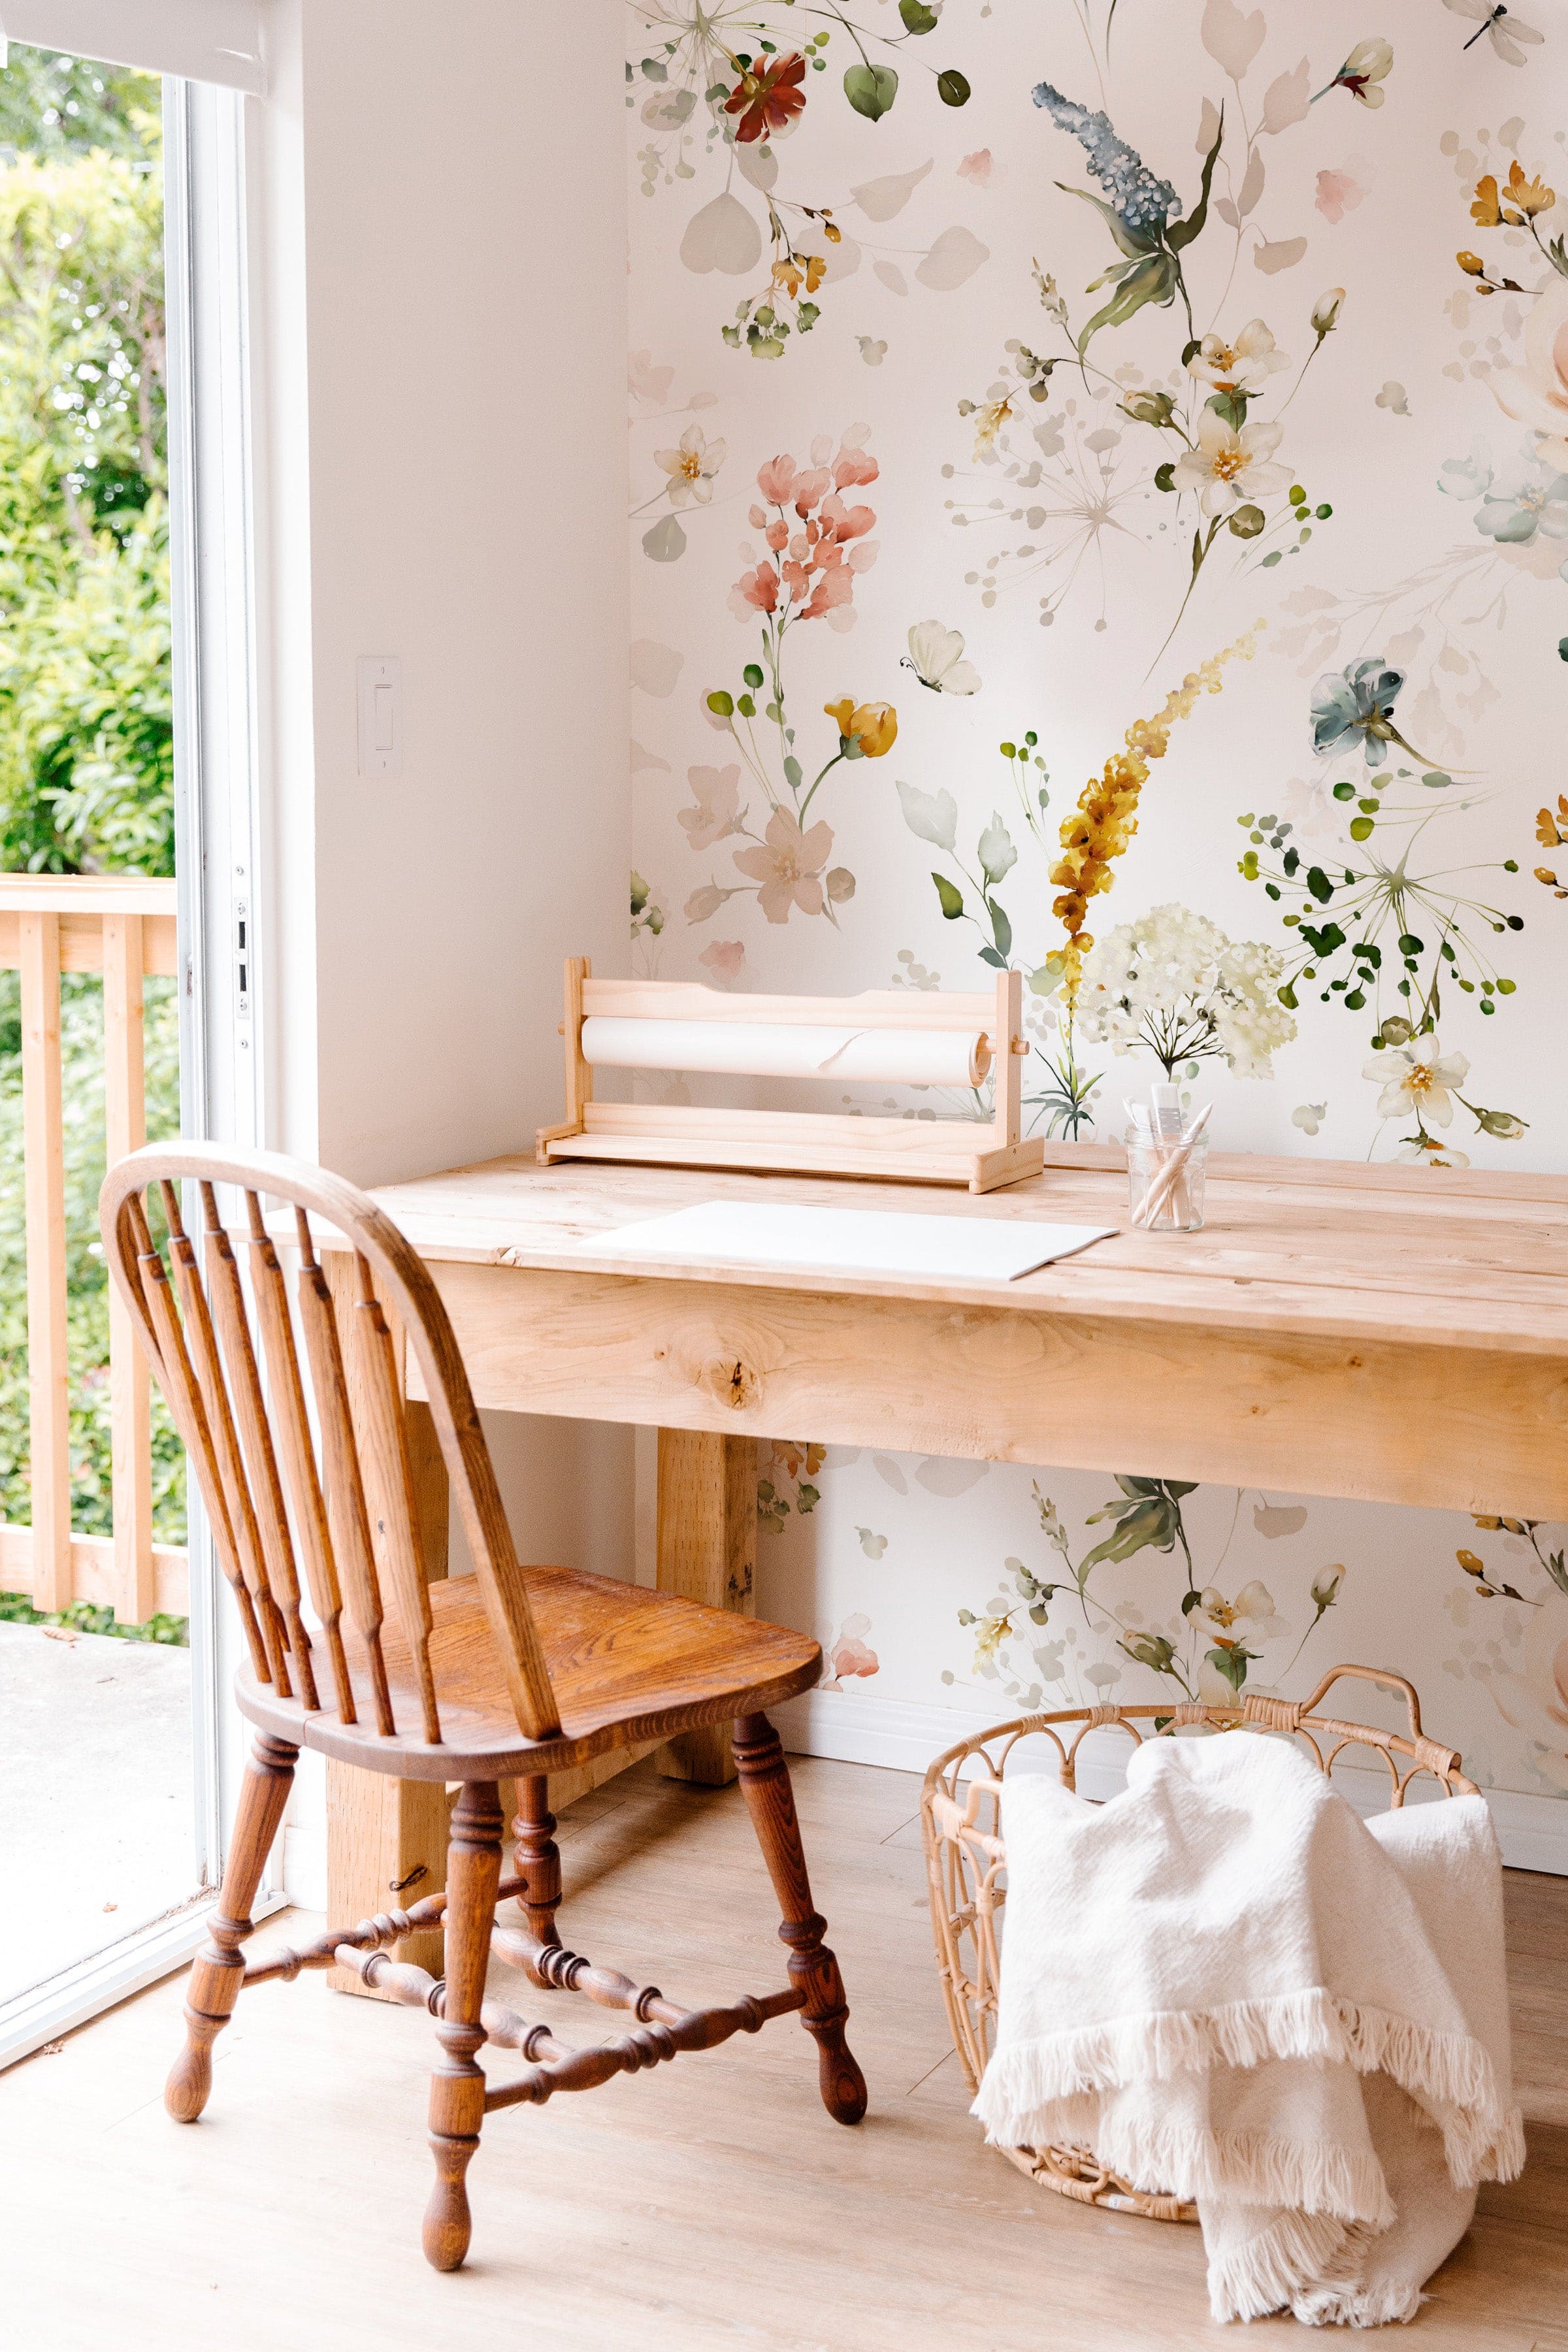 A cozy workspace set against a backdrop of Fiori Wallpaper, featuring gentle floral motifs in watercolor. The natural light from the window illuminates the subtle colors of the wallpaper, paired with a simple wooden desk and a traditional wooden chair